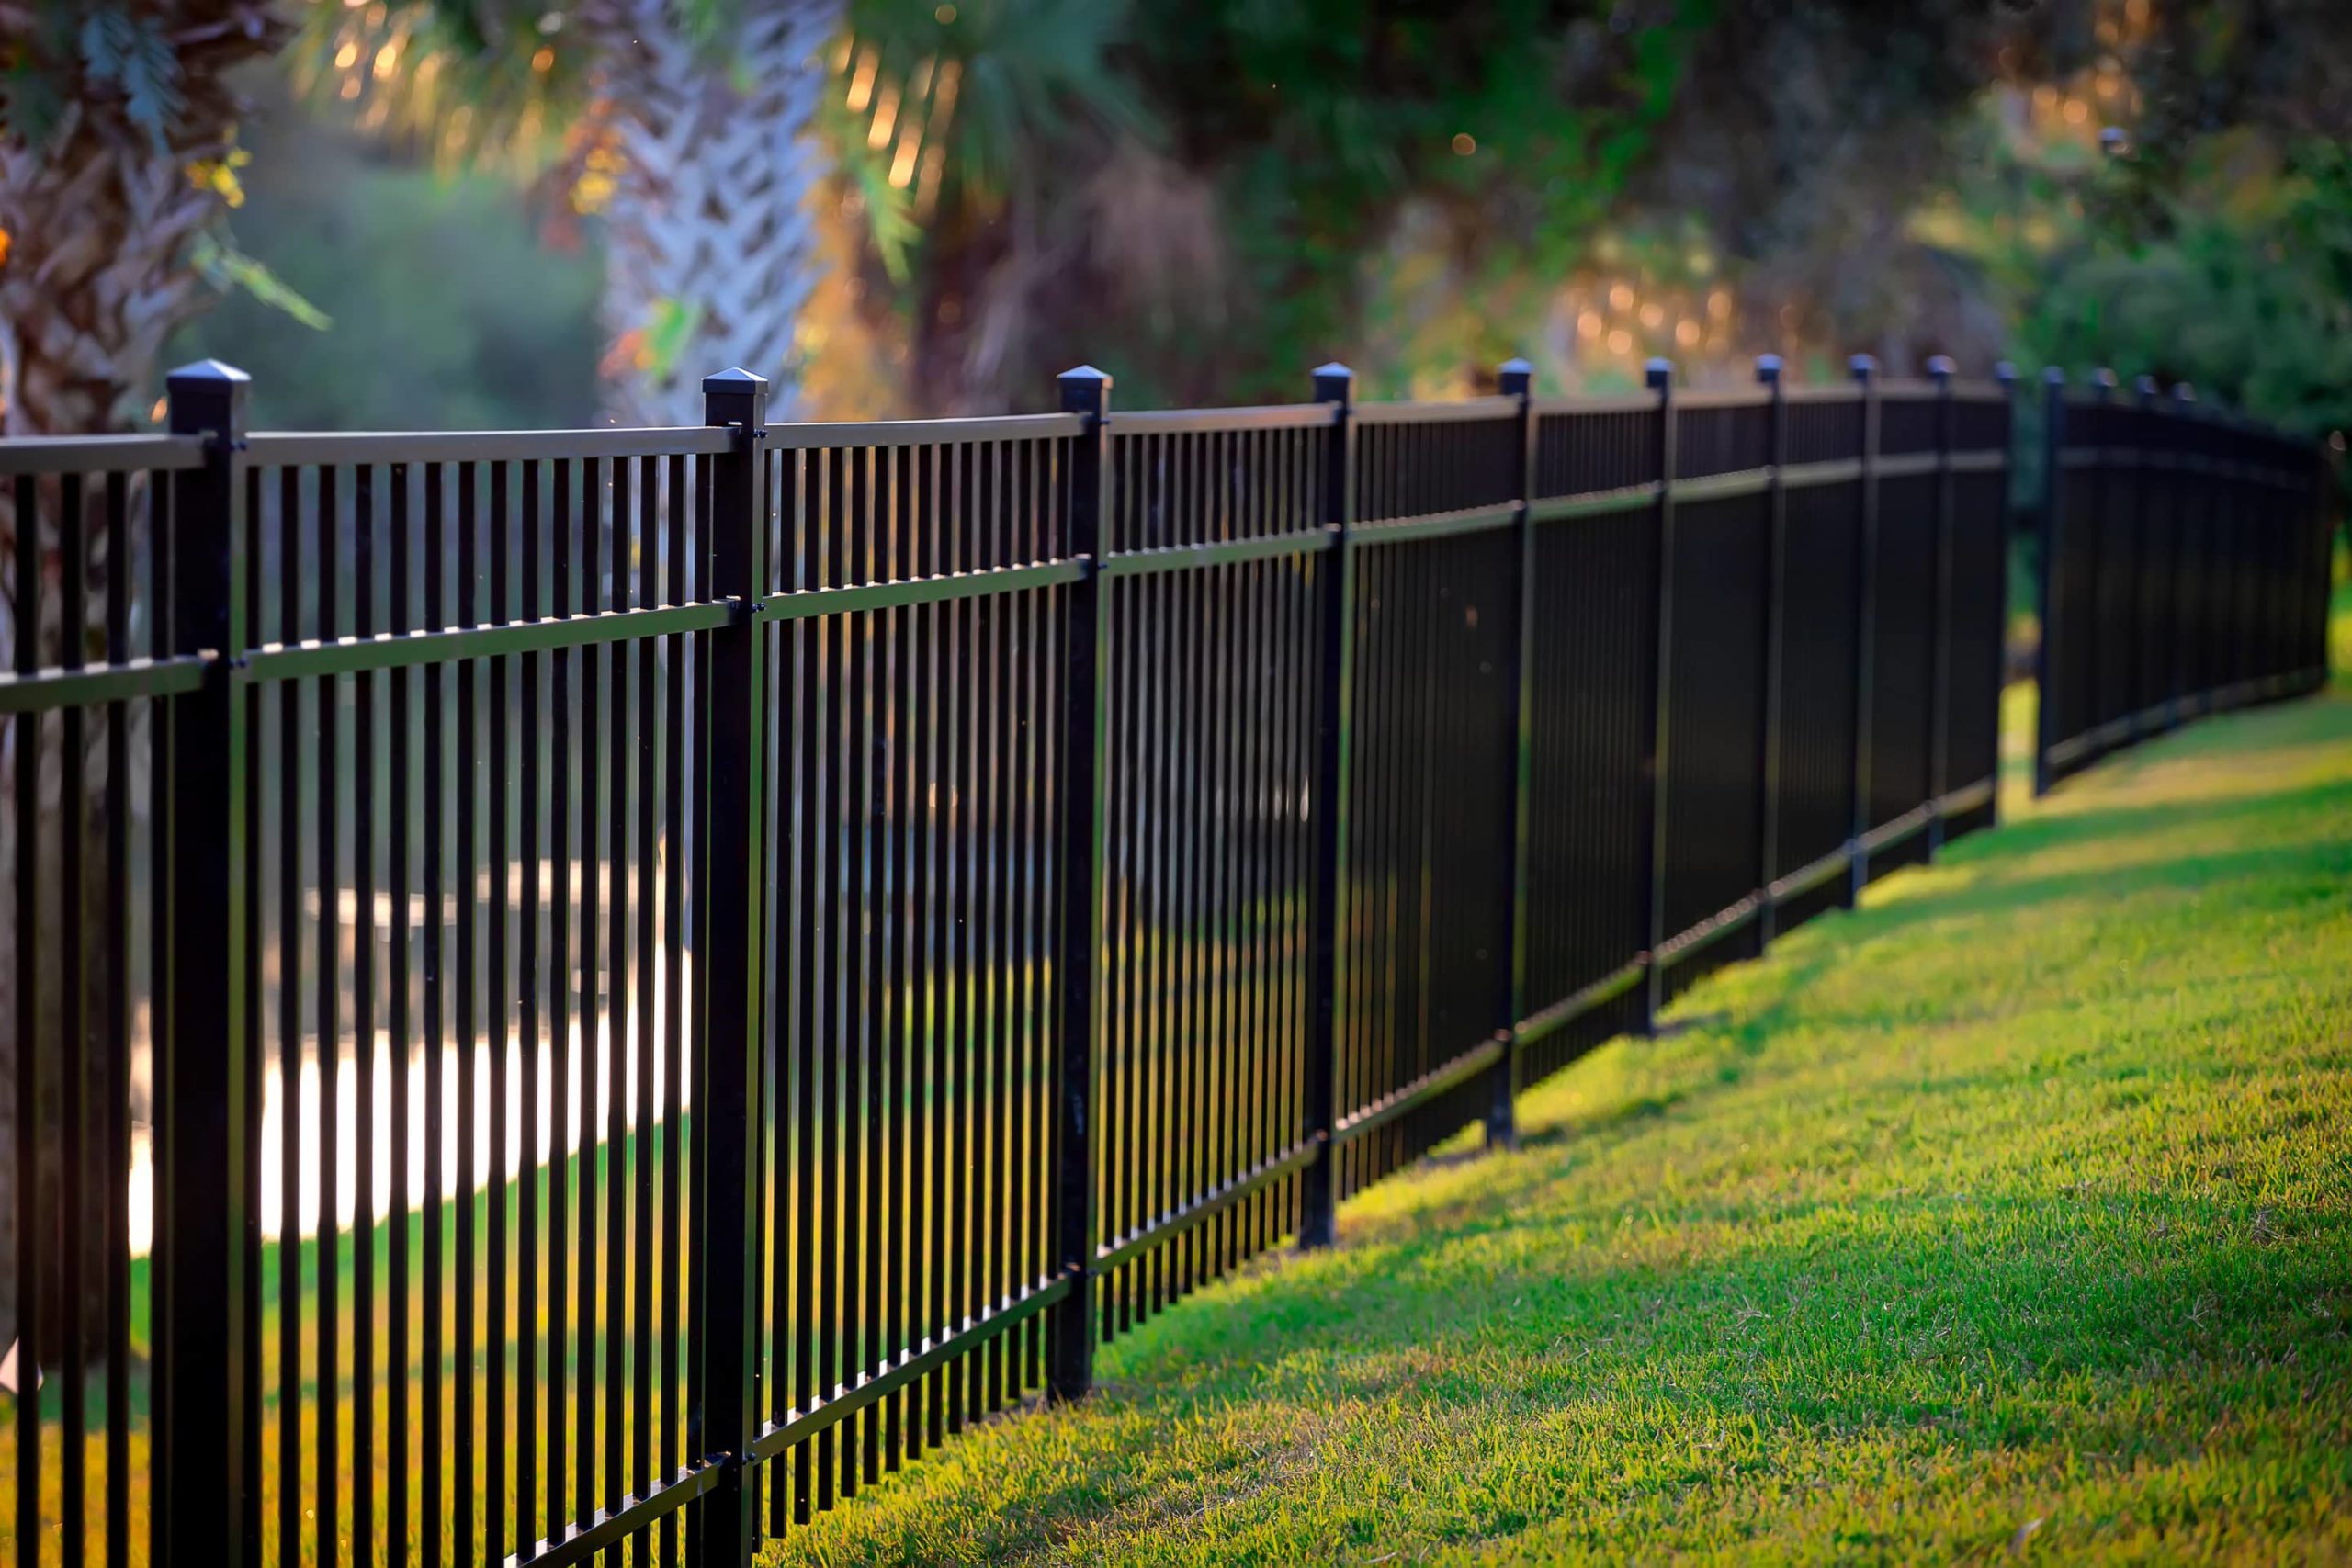 An image of a stylish and sturdy metal fence next to a lawn.